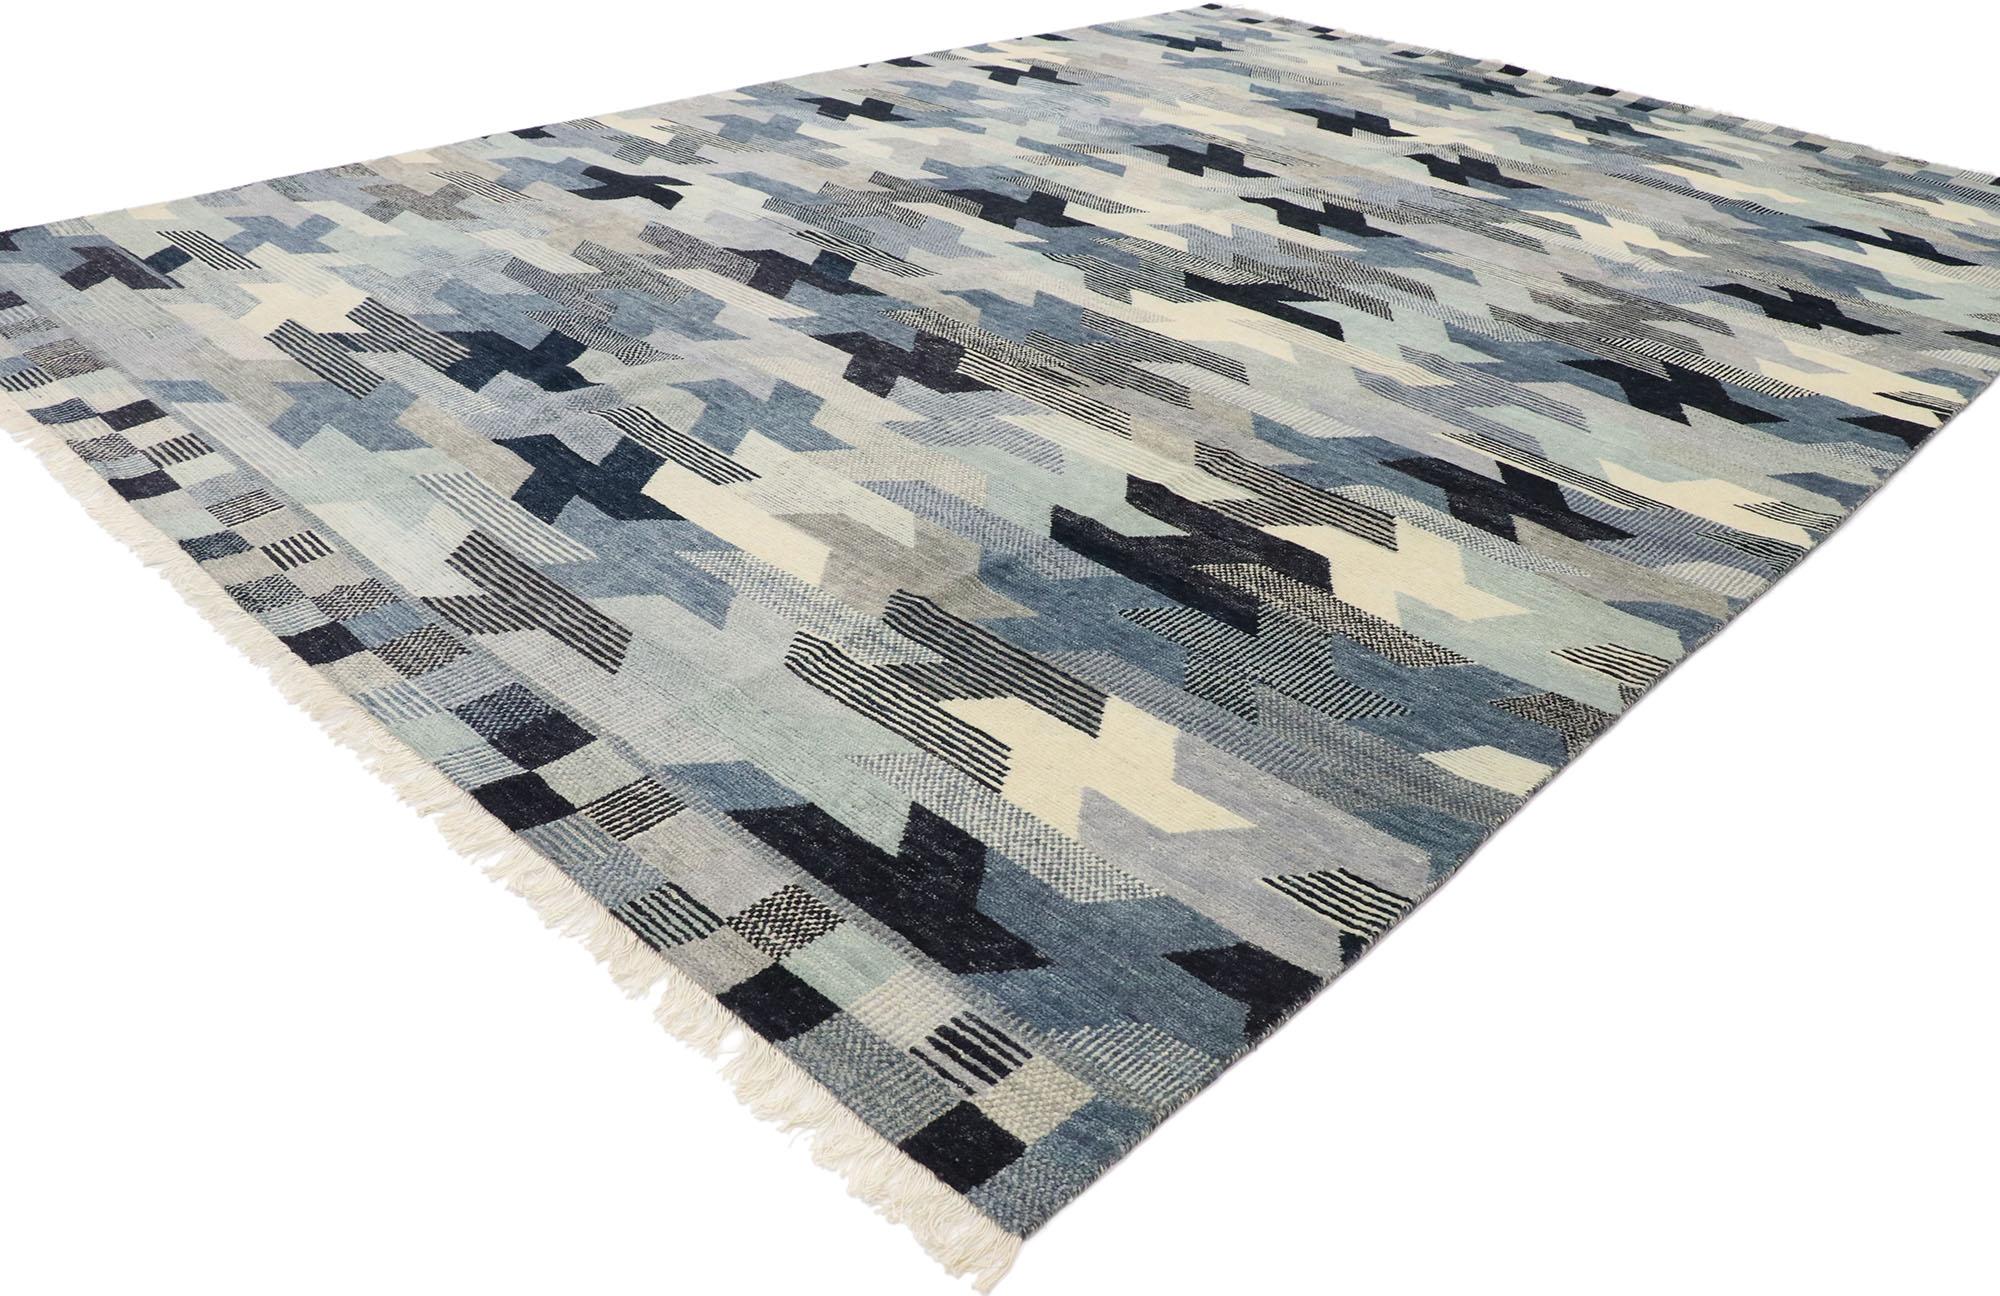 30547 New Contemporary Moroccan style rug inspired by Barbro Nilsson. This hand knotted wool new contemporary Moroccan style rug features a rectilinear pattern composed of interlocking geometric shapes in alternating blue, gray, and beige hues. With